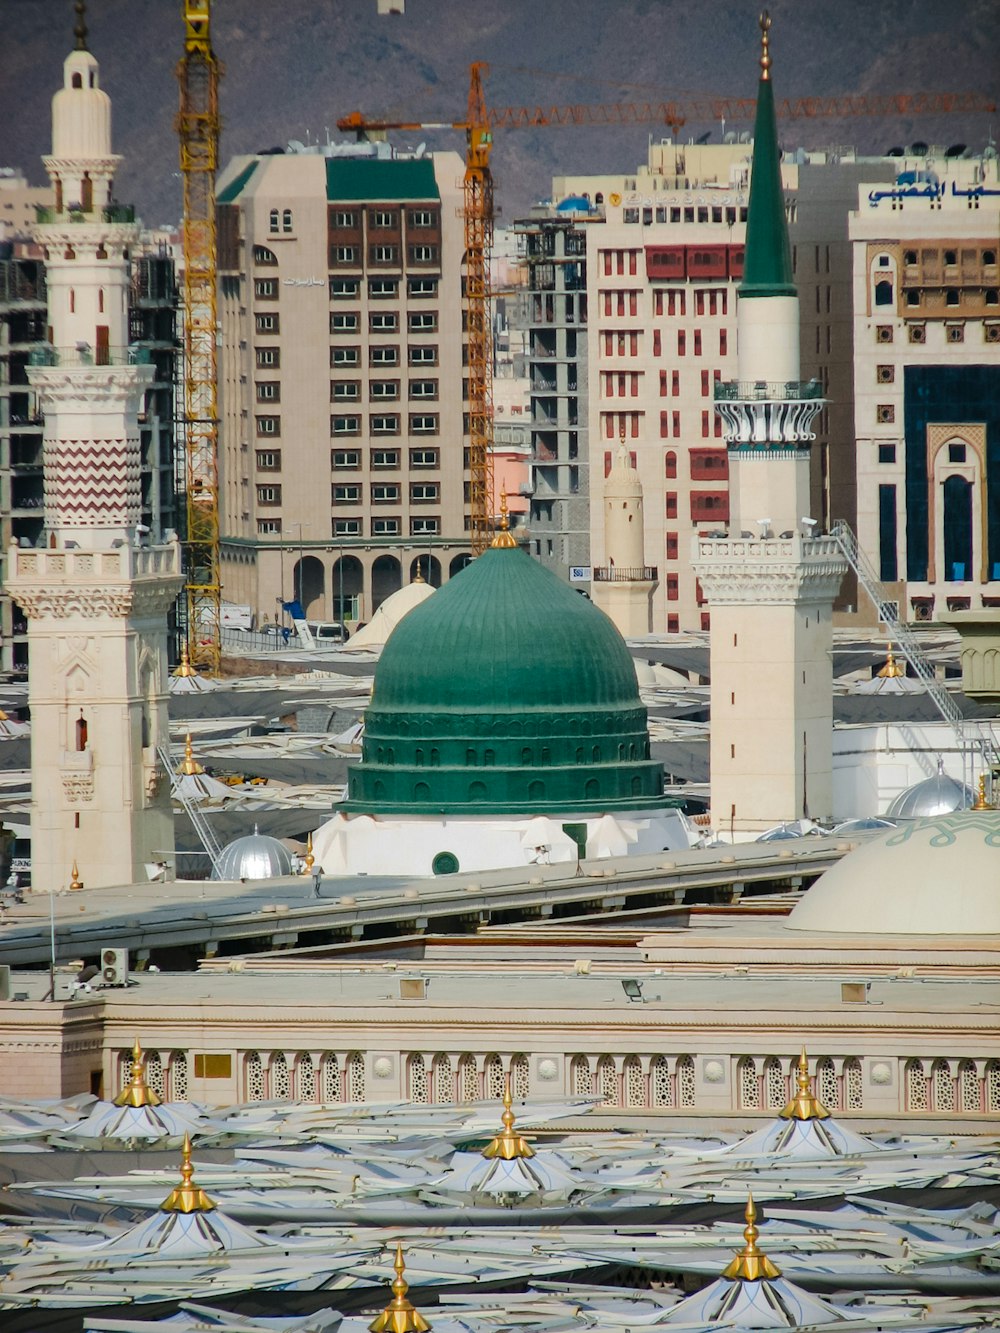 a large building with a green dome in the middle of a city